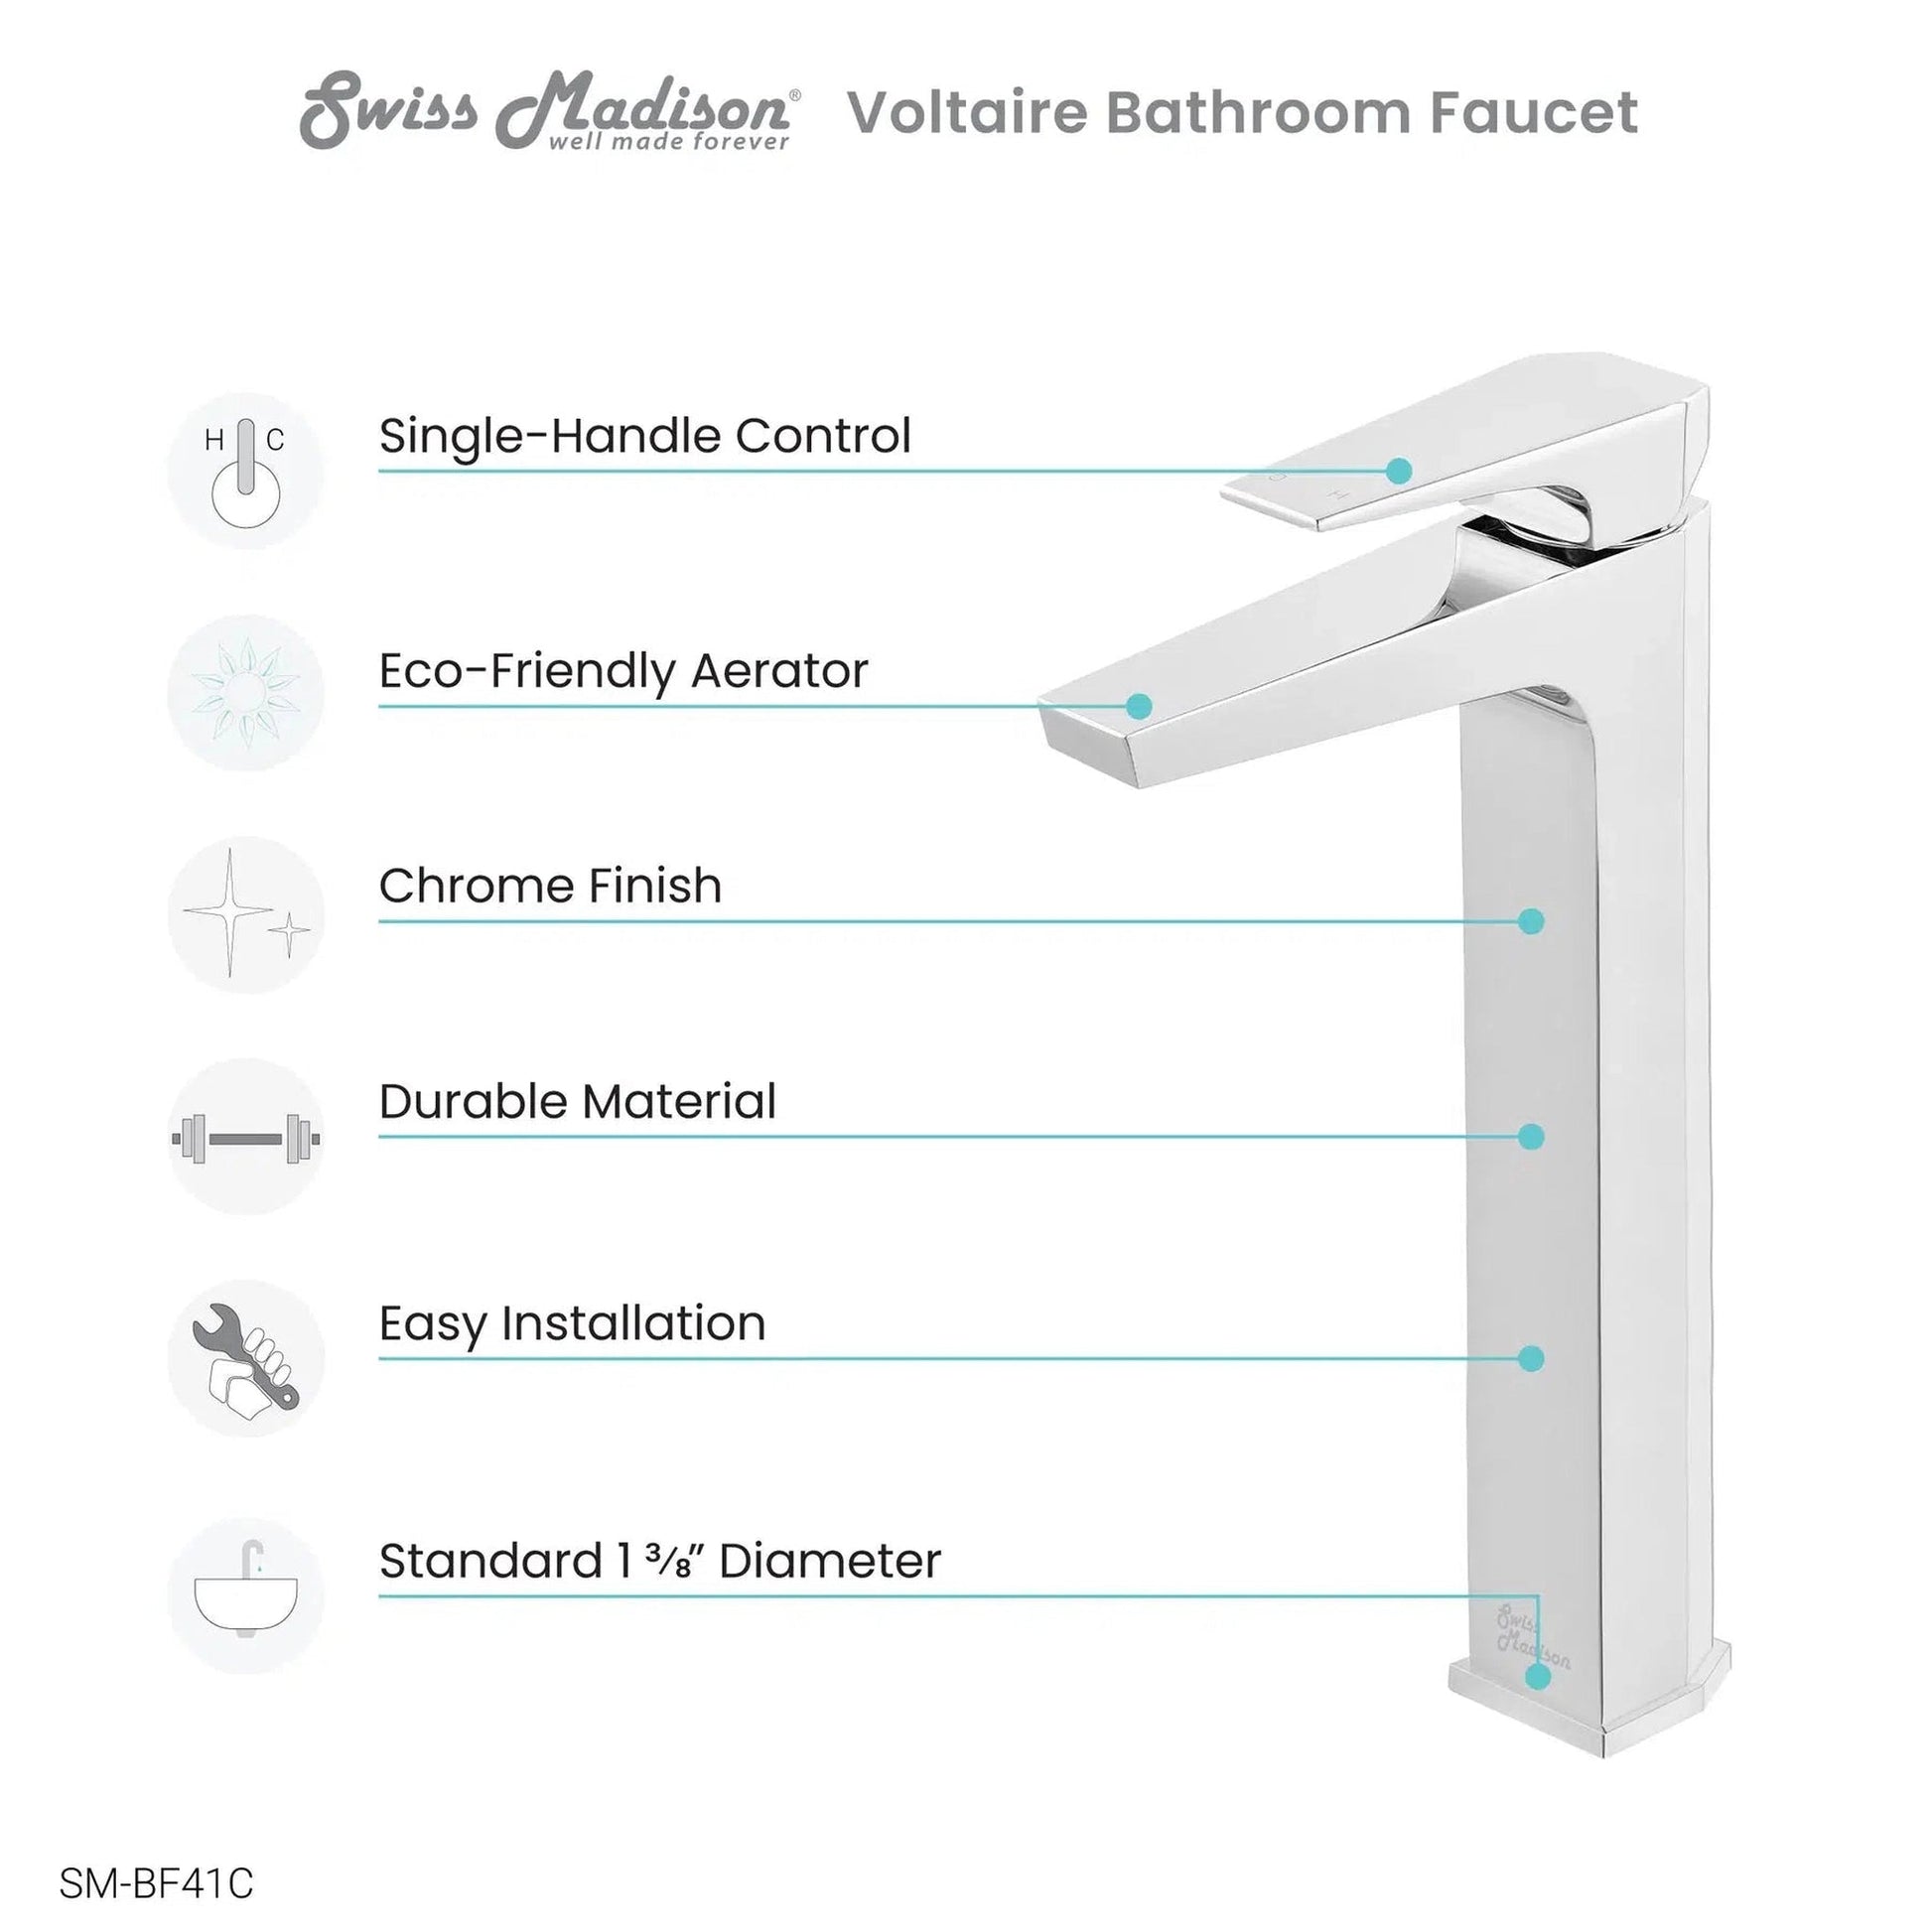 Swiss Madison Voltaire 11" Chrome Single Hole Bathroom Faucet With Flow Rate of 1.5 GPM